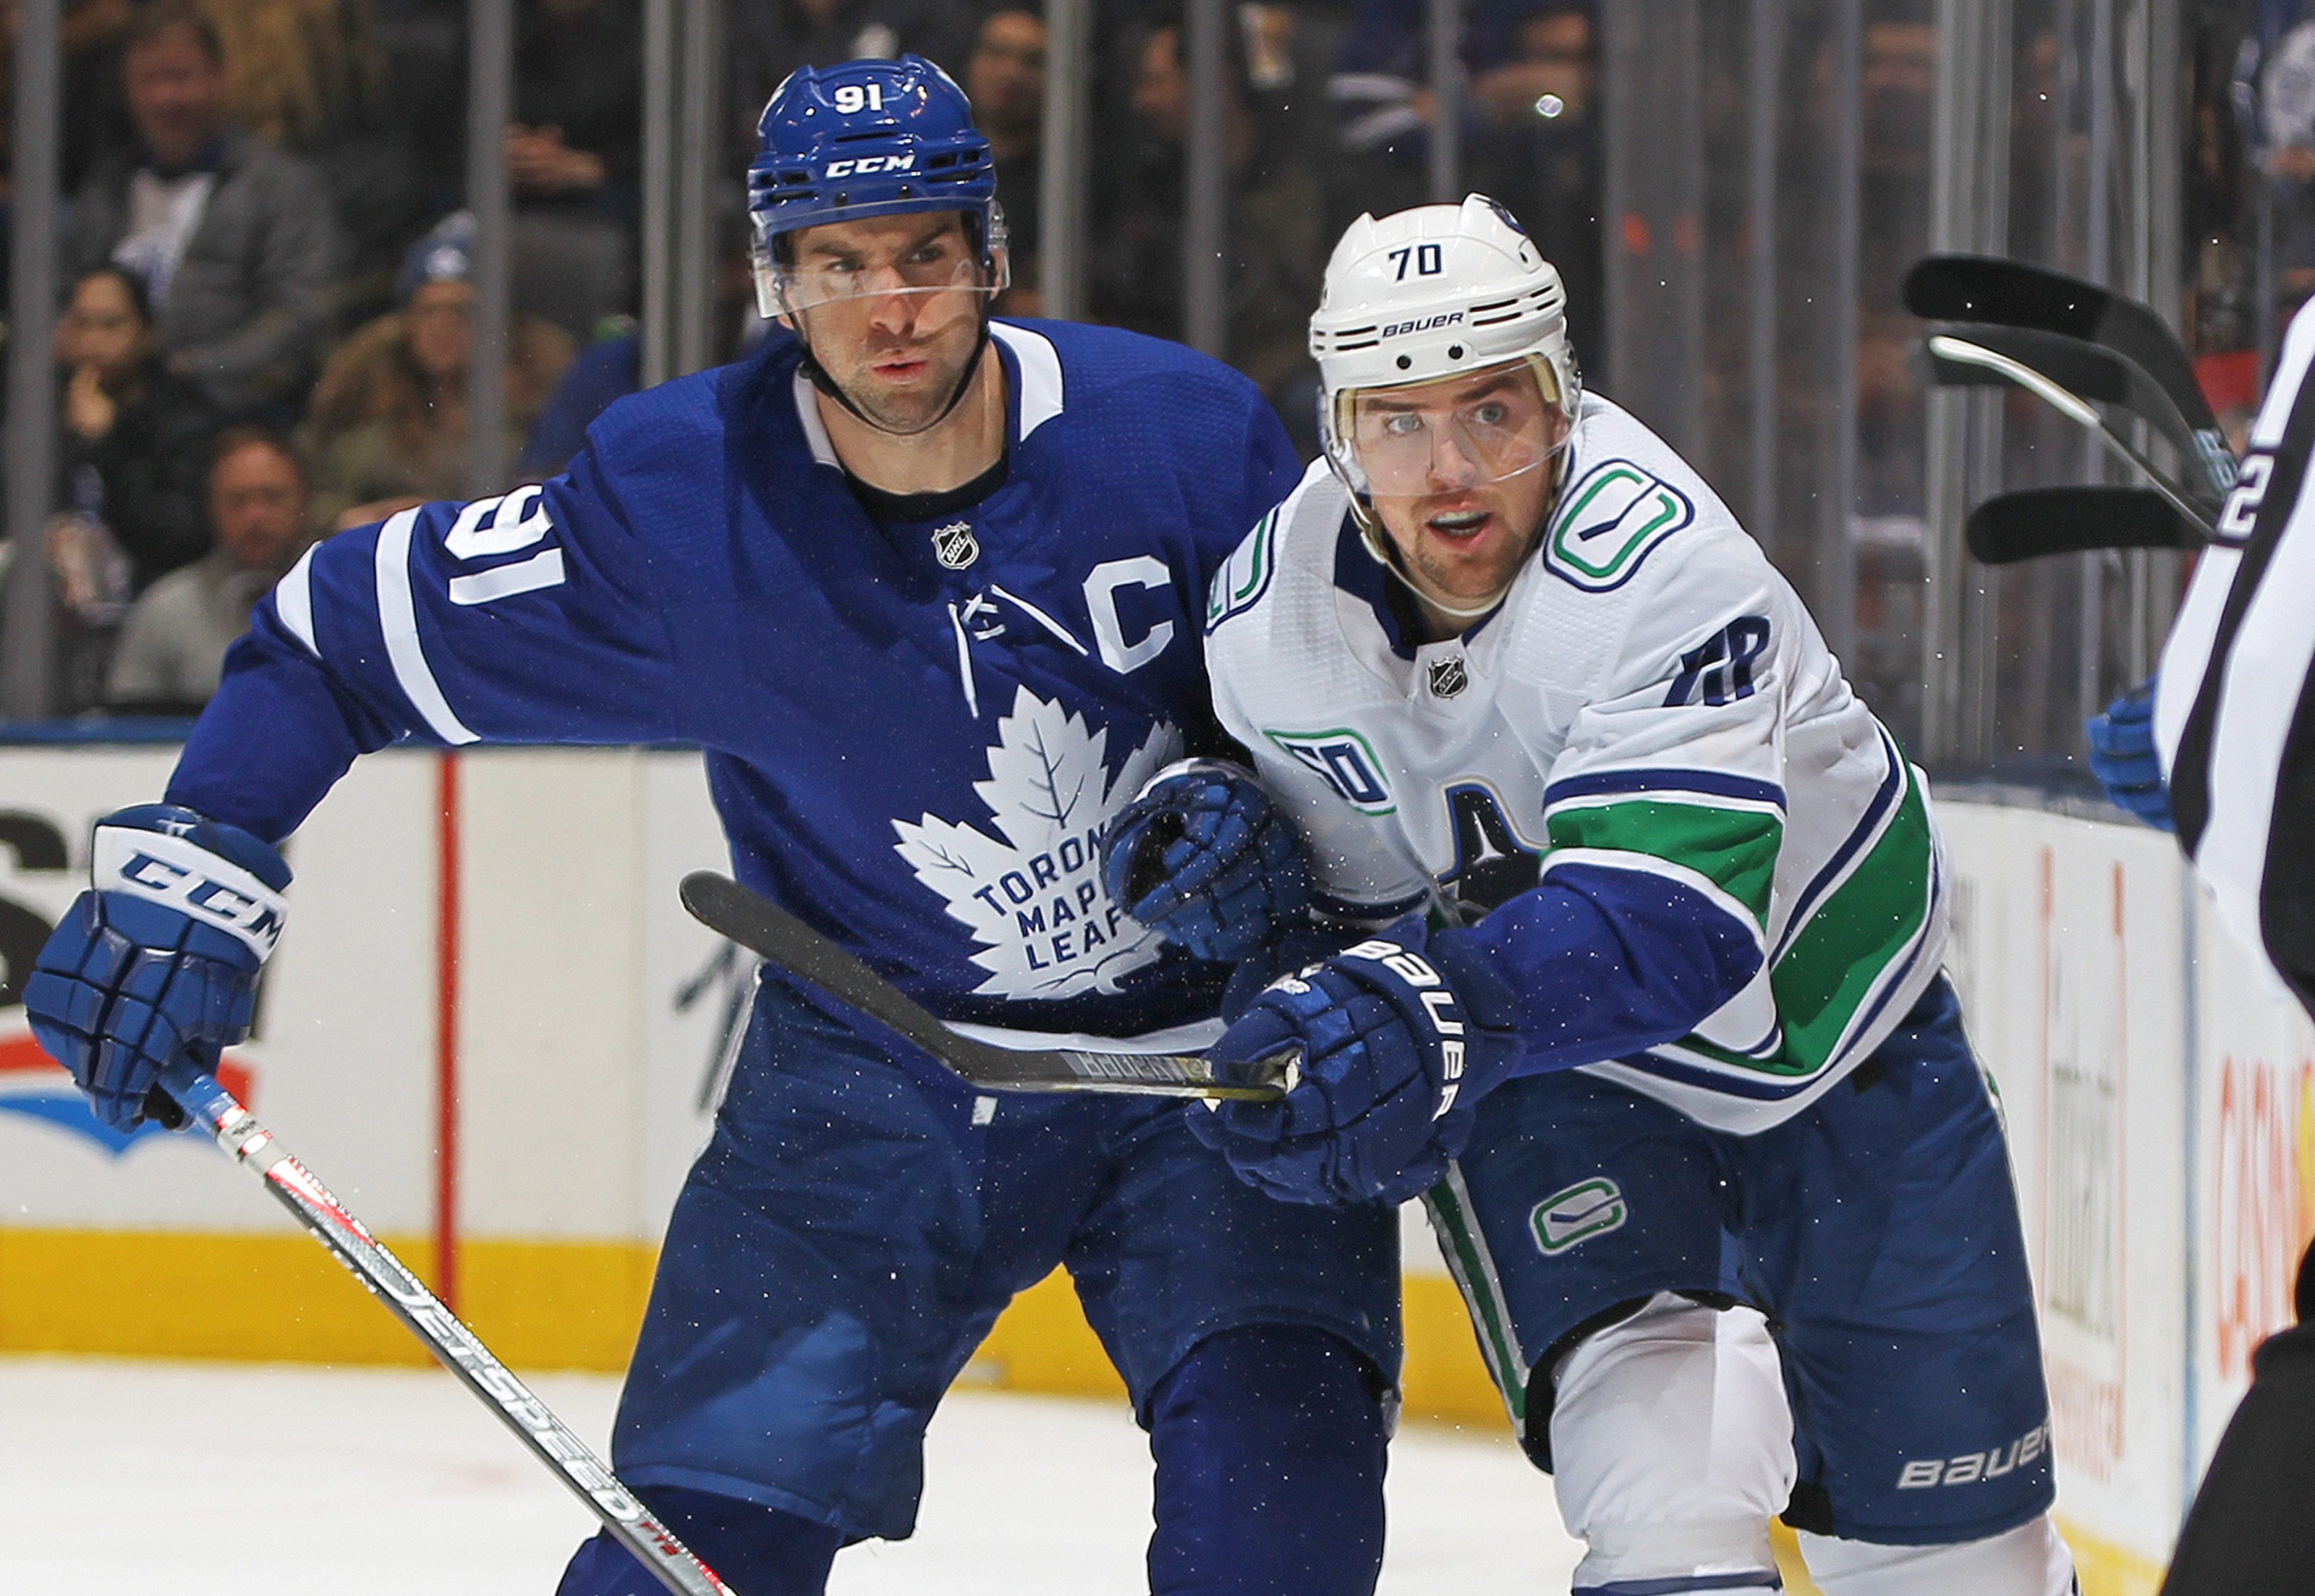 Vancouver Canucks defeat Toronto Maple Leafs